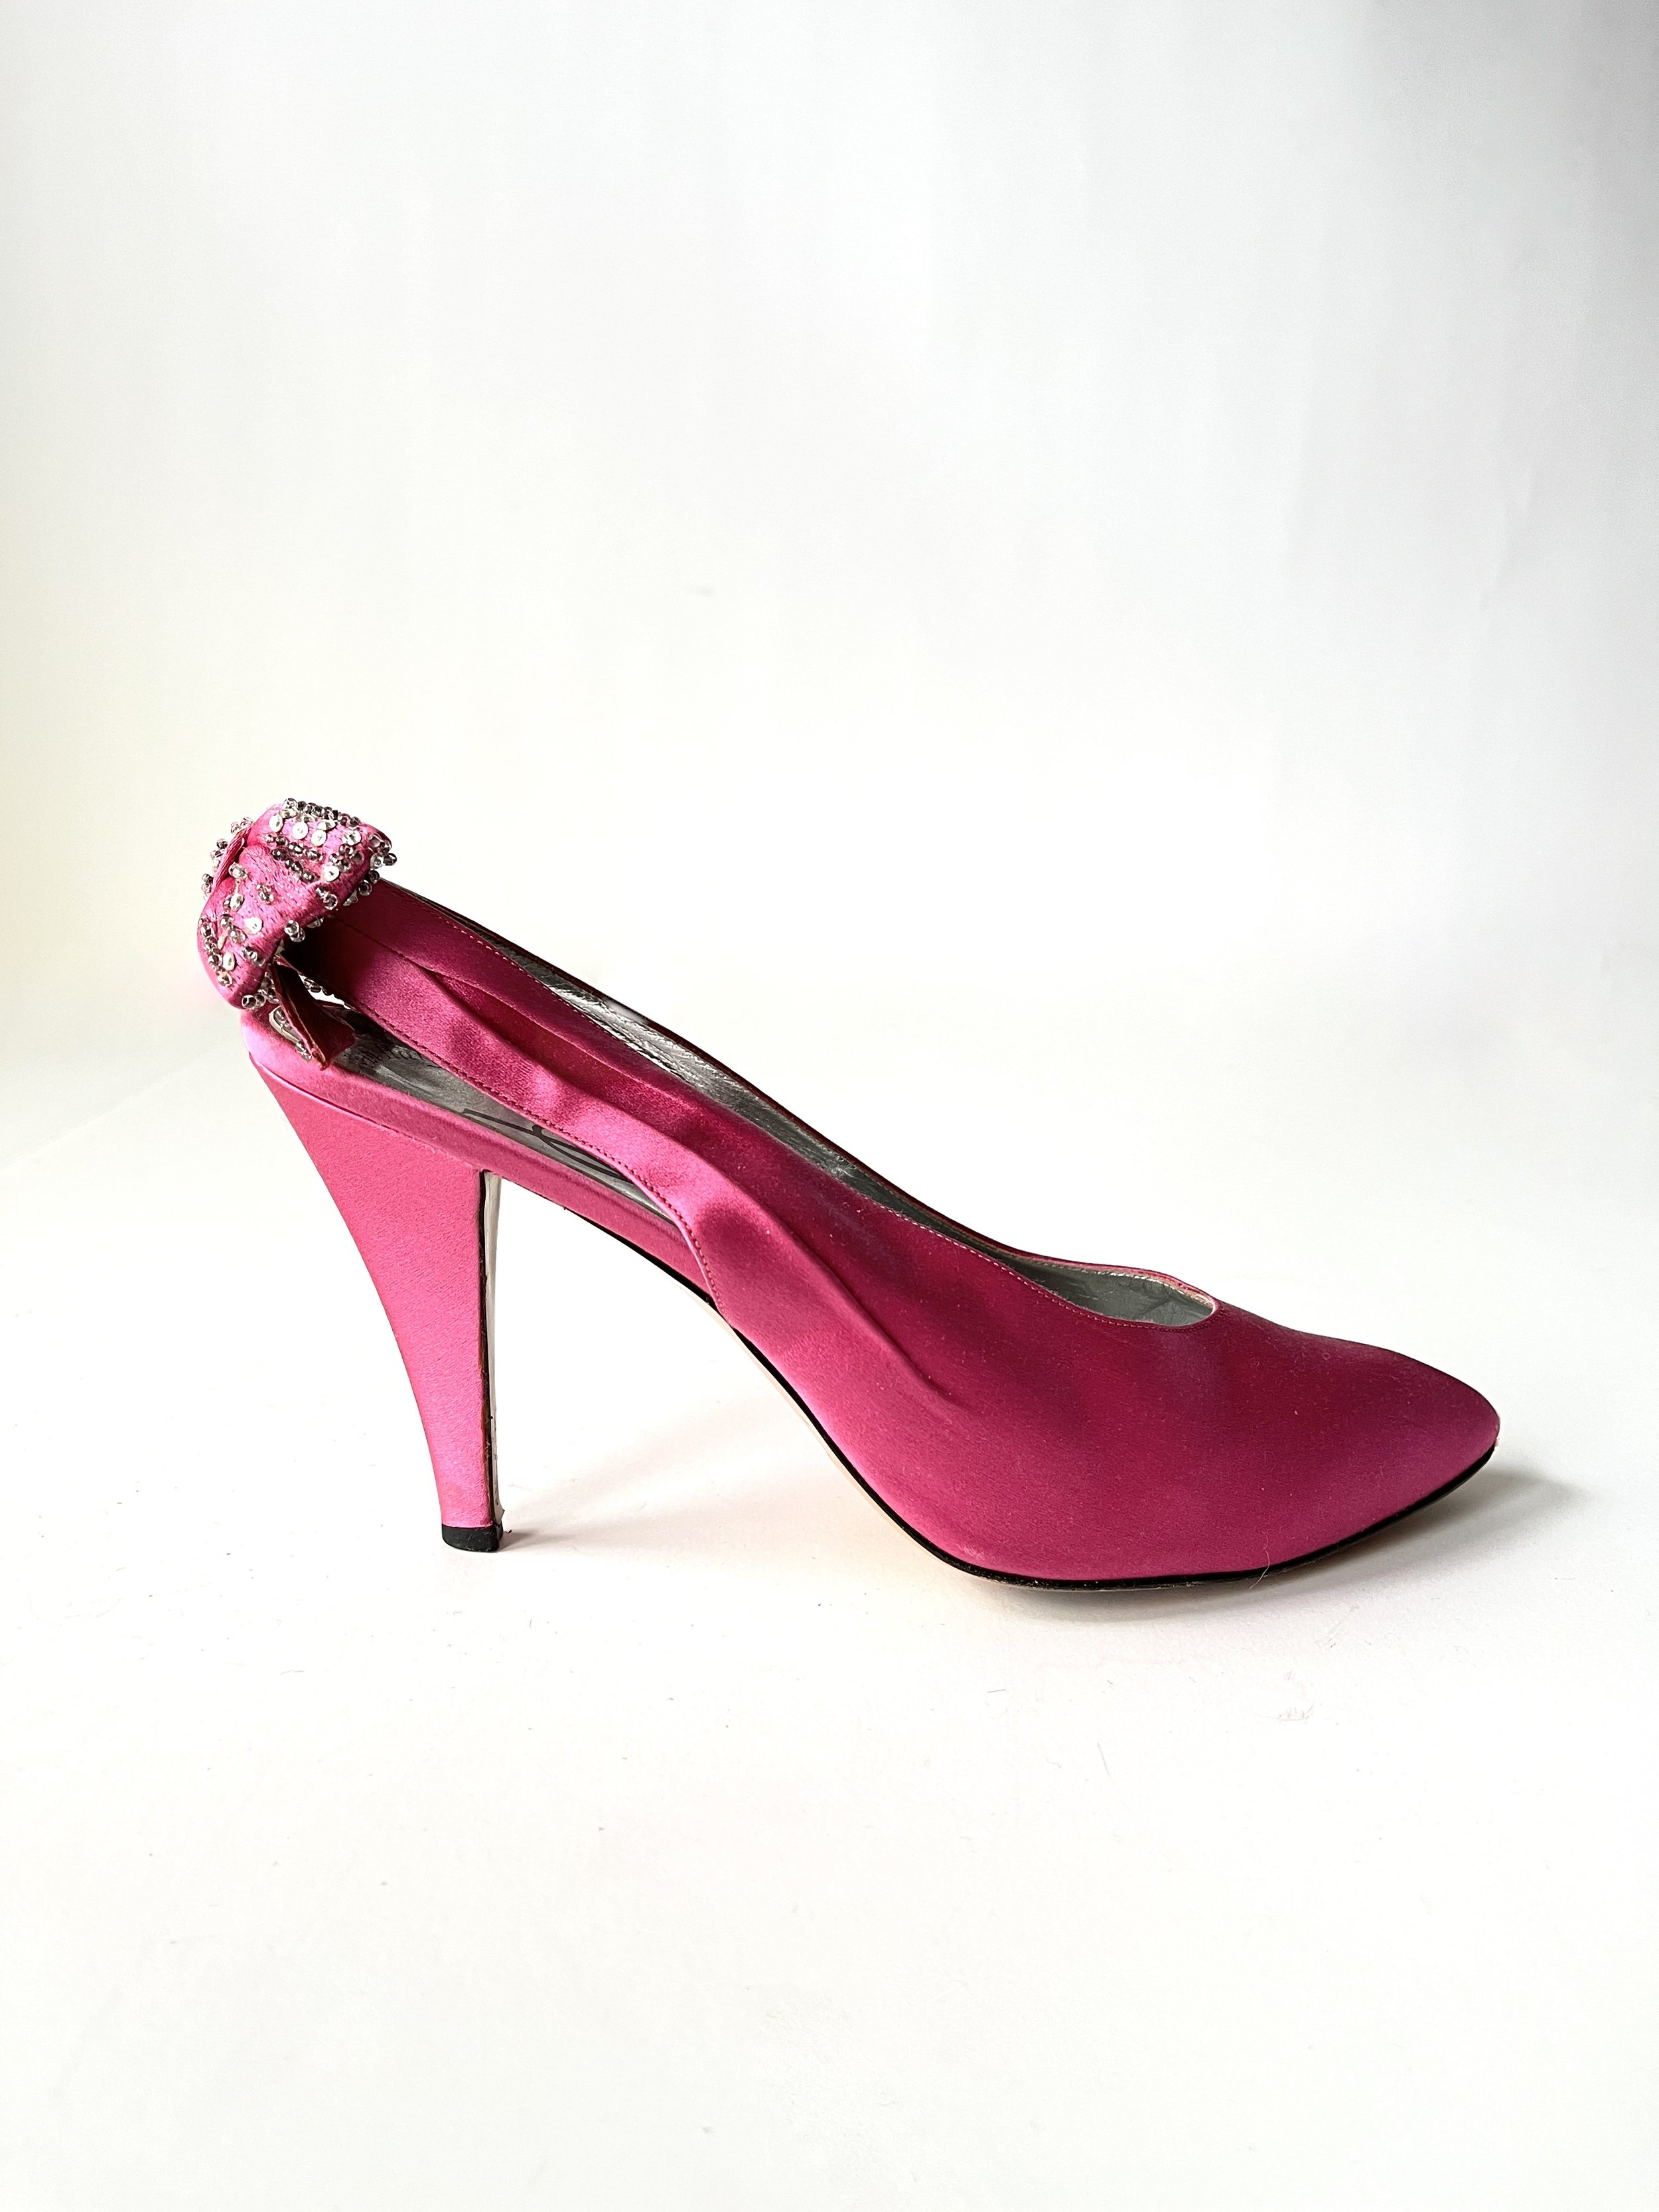 Women's Yves Saint Laurent Hot Pink sling back shoes — GOODS and PROVISIONS